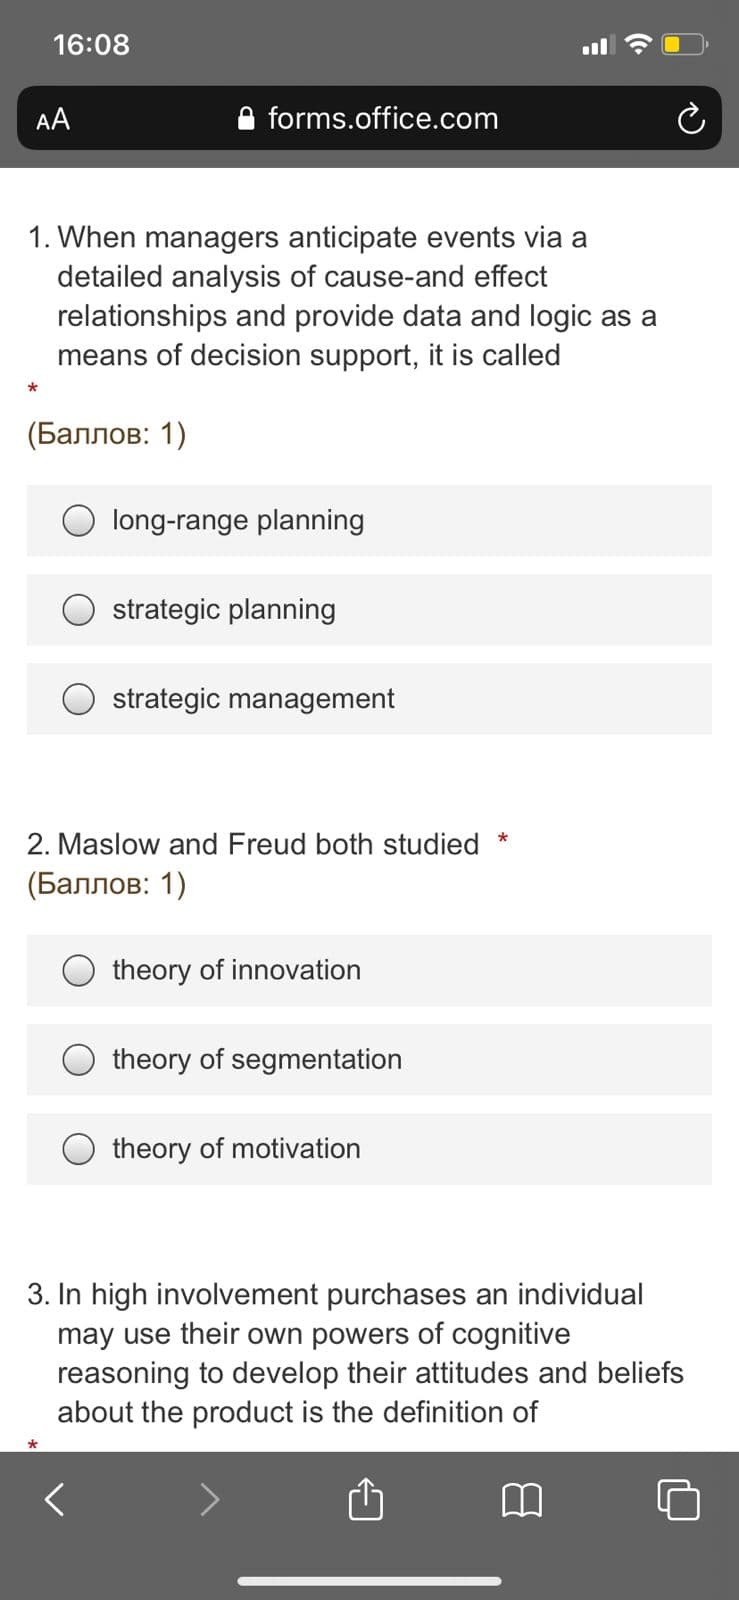 16:08
l
AA
forms.office.com
1. When managers anticipate events via a
detailed analysis of cause-and effect
relationships and provide data and logic as a
means of decision support, it is called
(Баллов: 1)
long-range planning
strategic planning
strategic management
2. Maslow and Freud both studied
*
(Баллов: 1)
theory of innovation
theory of segmentation
O theory of motivation
3. In high involvement purchases an individual
may use their own powers of cognitive
reasoning to develop their attitudes and beliefs
about the product is the definition of
